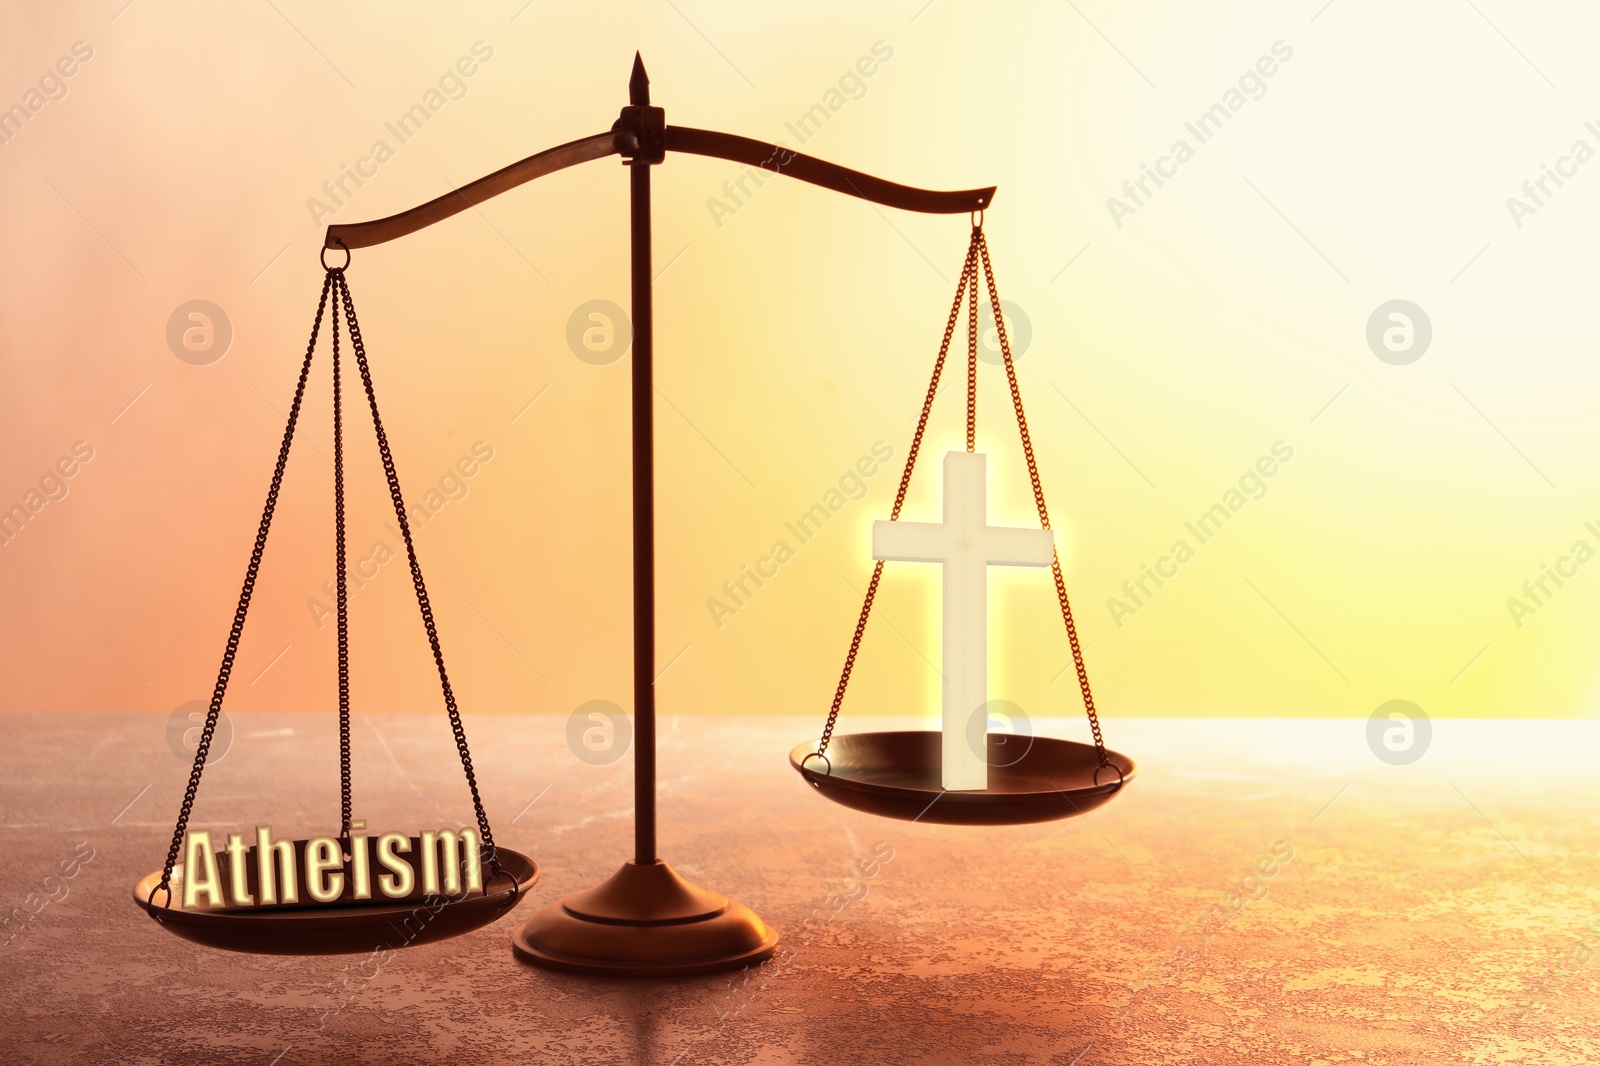 Image of Choice between atheism and religion. Scales with word and cross on textured surface